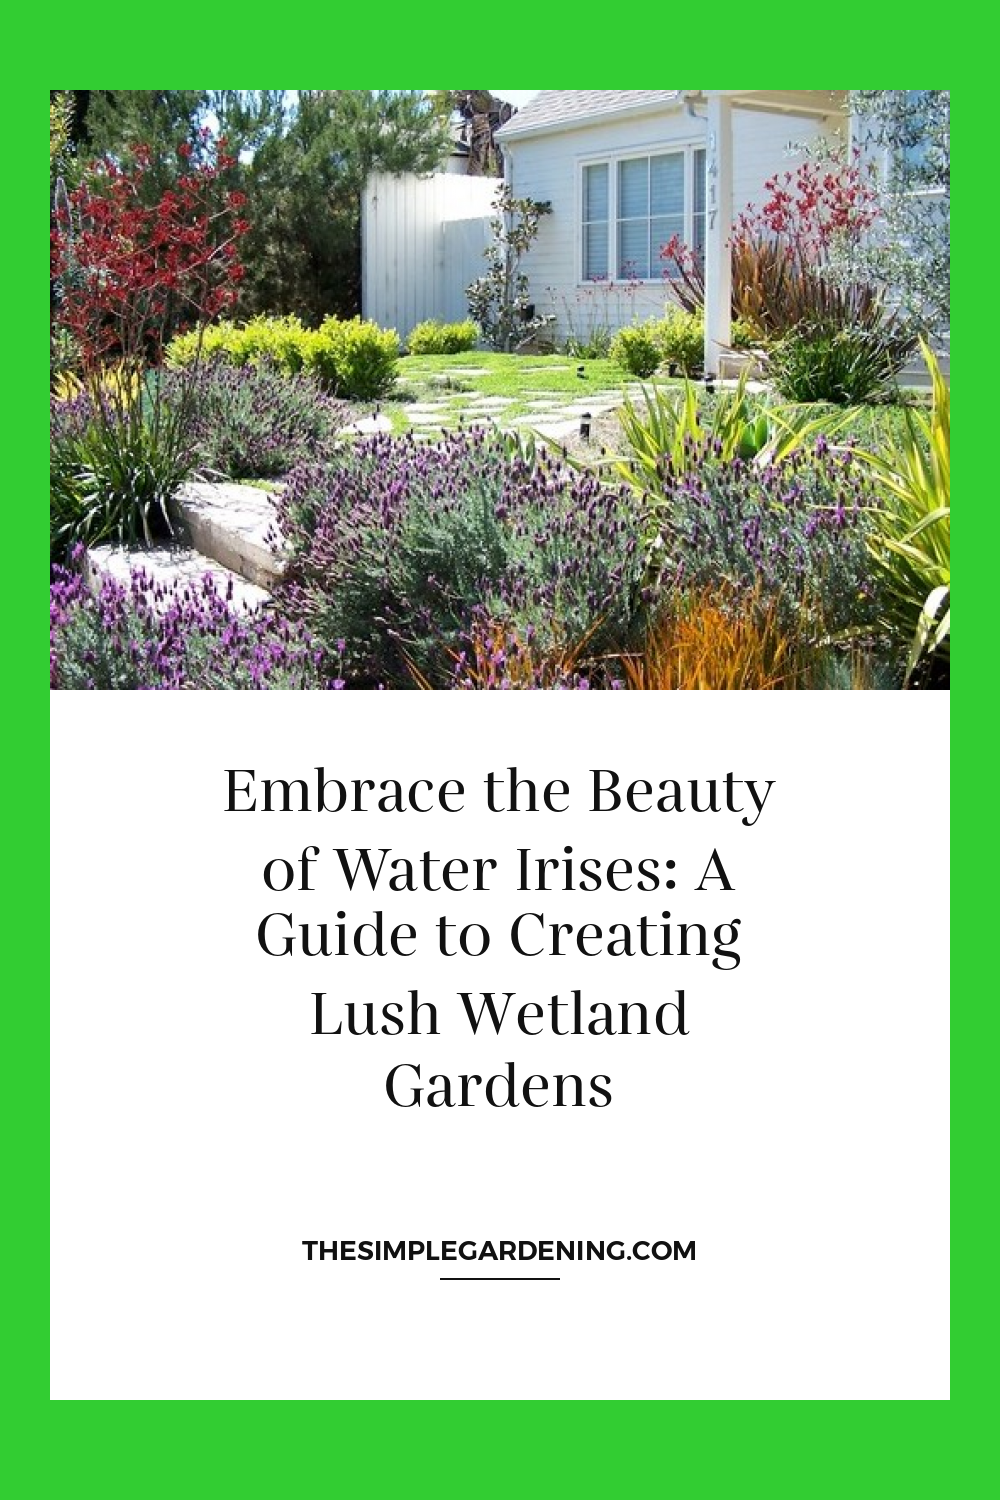 Embrace the Beauty of Water Irises: A Guide to Creating Lush Wetland Gardens